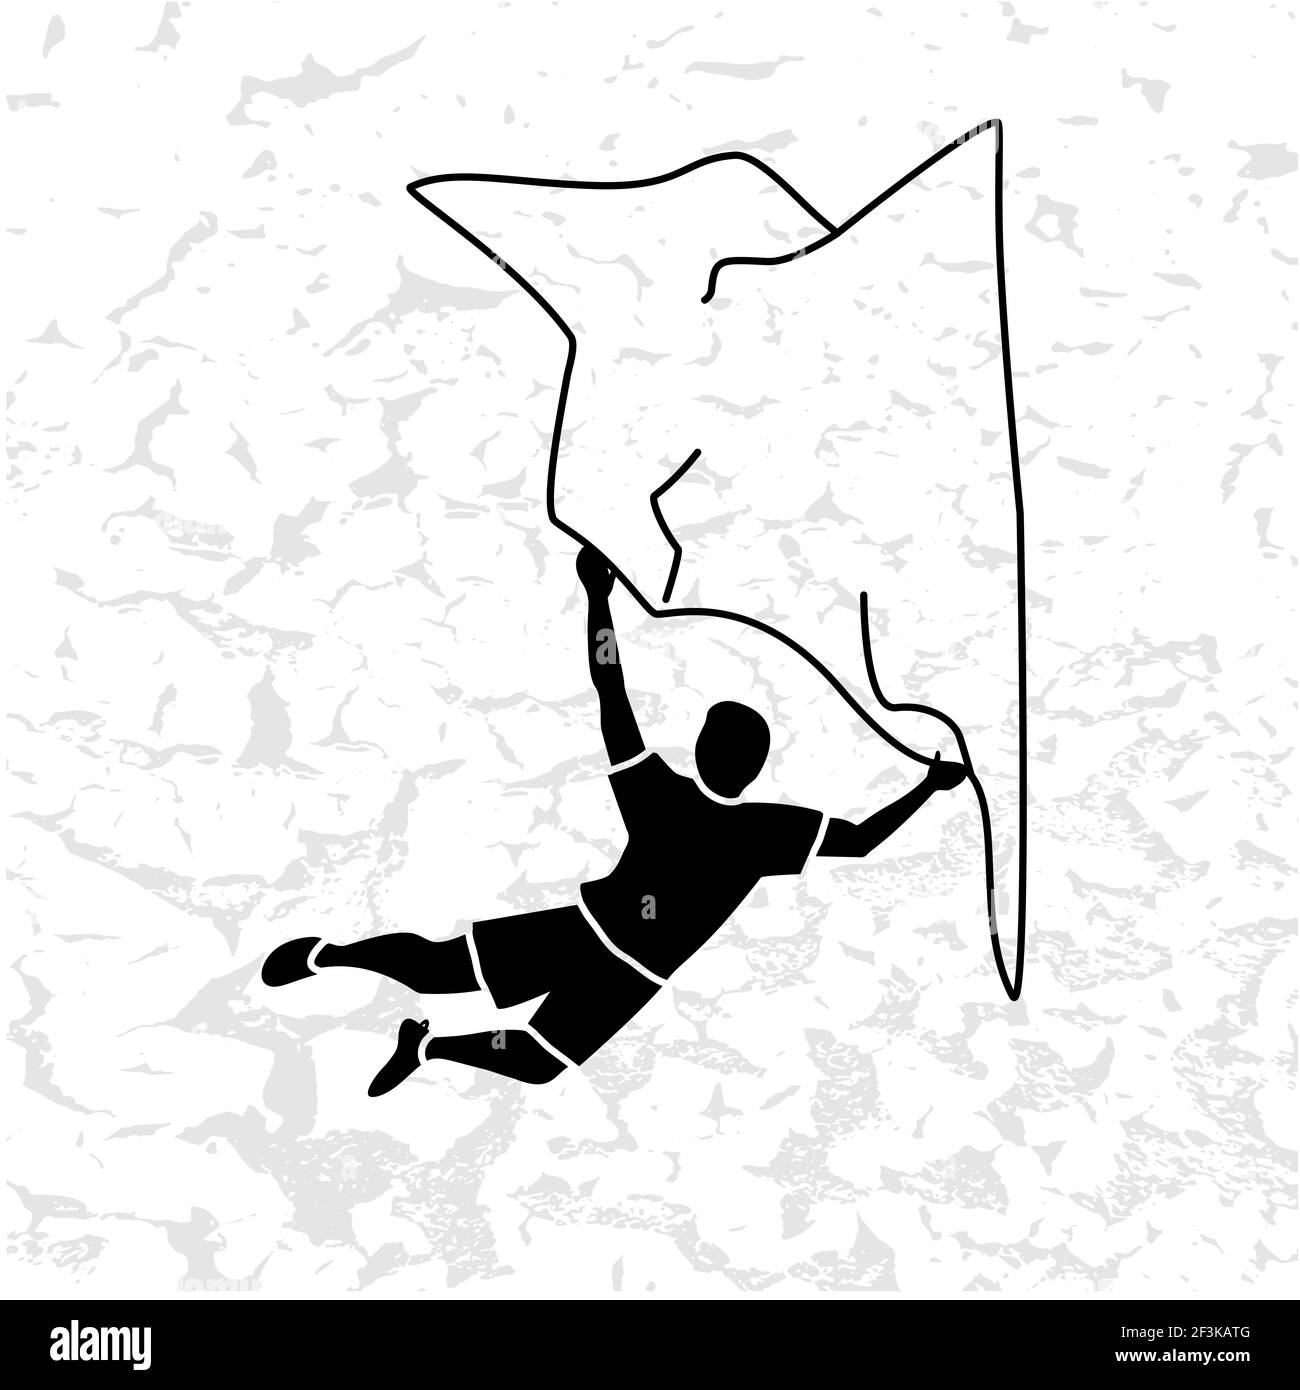 Silhouette of a climber. Rock climbing badge. Men doing extreme sport, adrenaline activity of strong men. Climber without a rope. EPS 10 Stock Vector